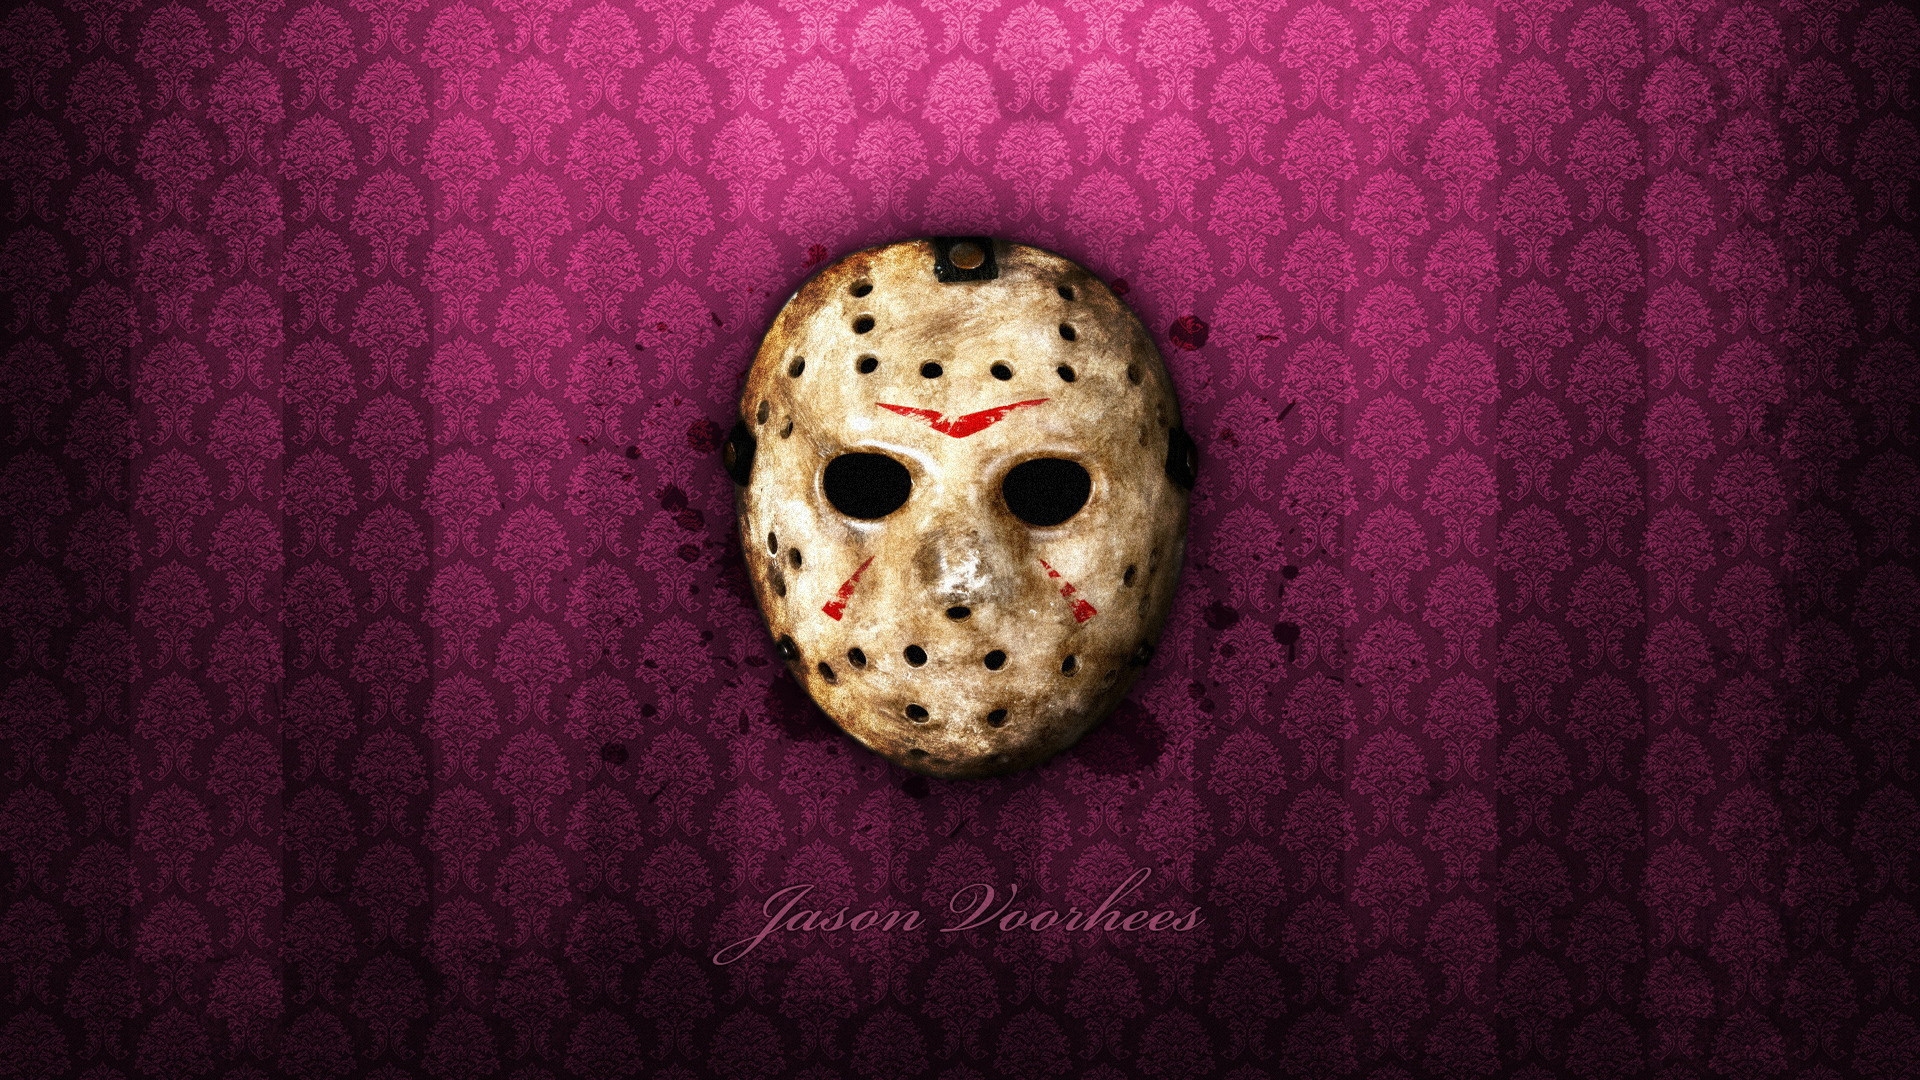 Wallpaper jason voorhees friday the 13th character